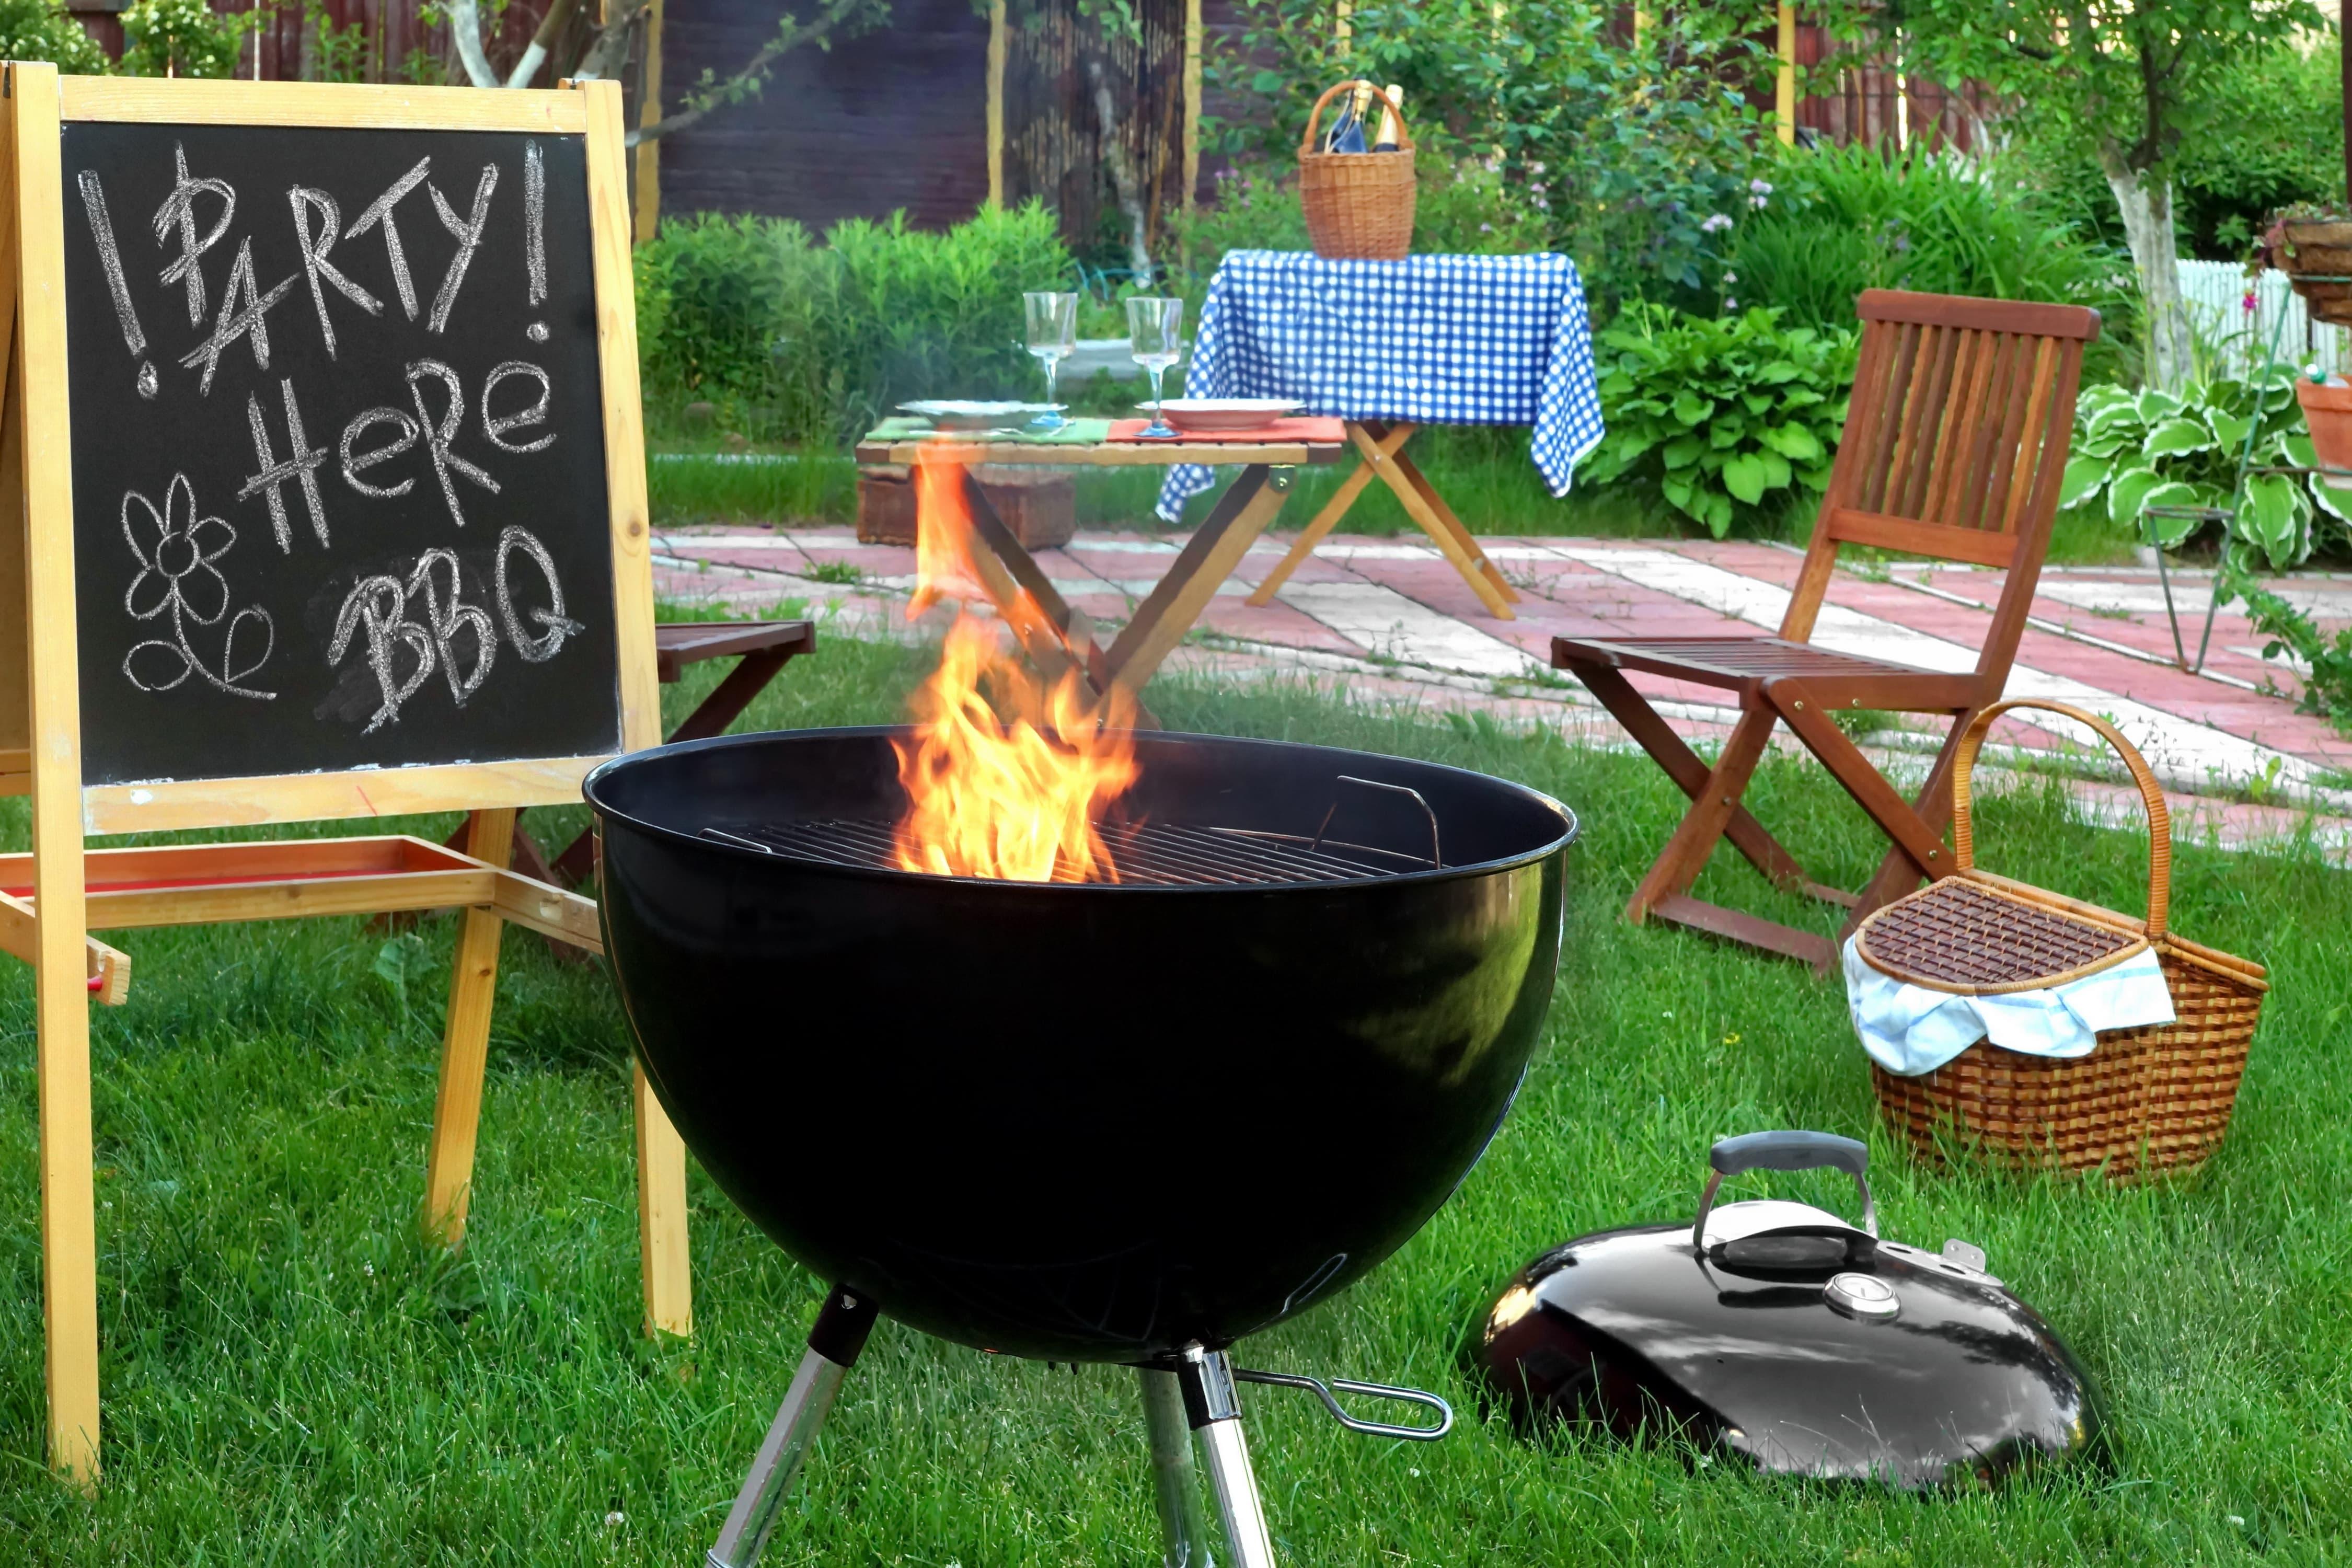 Charcoal grill and sign indicating a backyard BBQ party